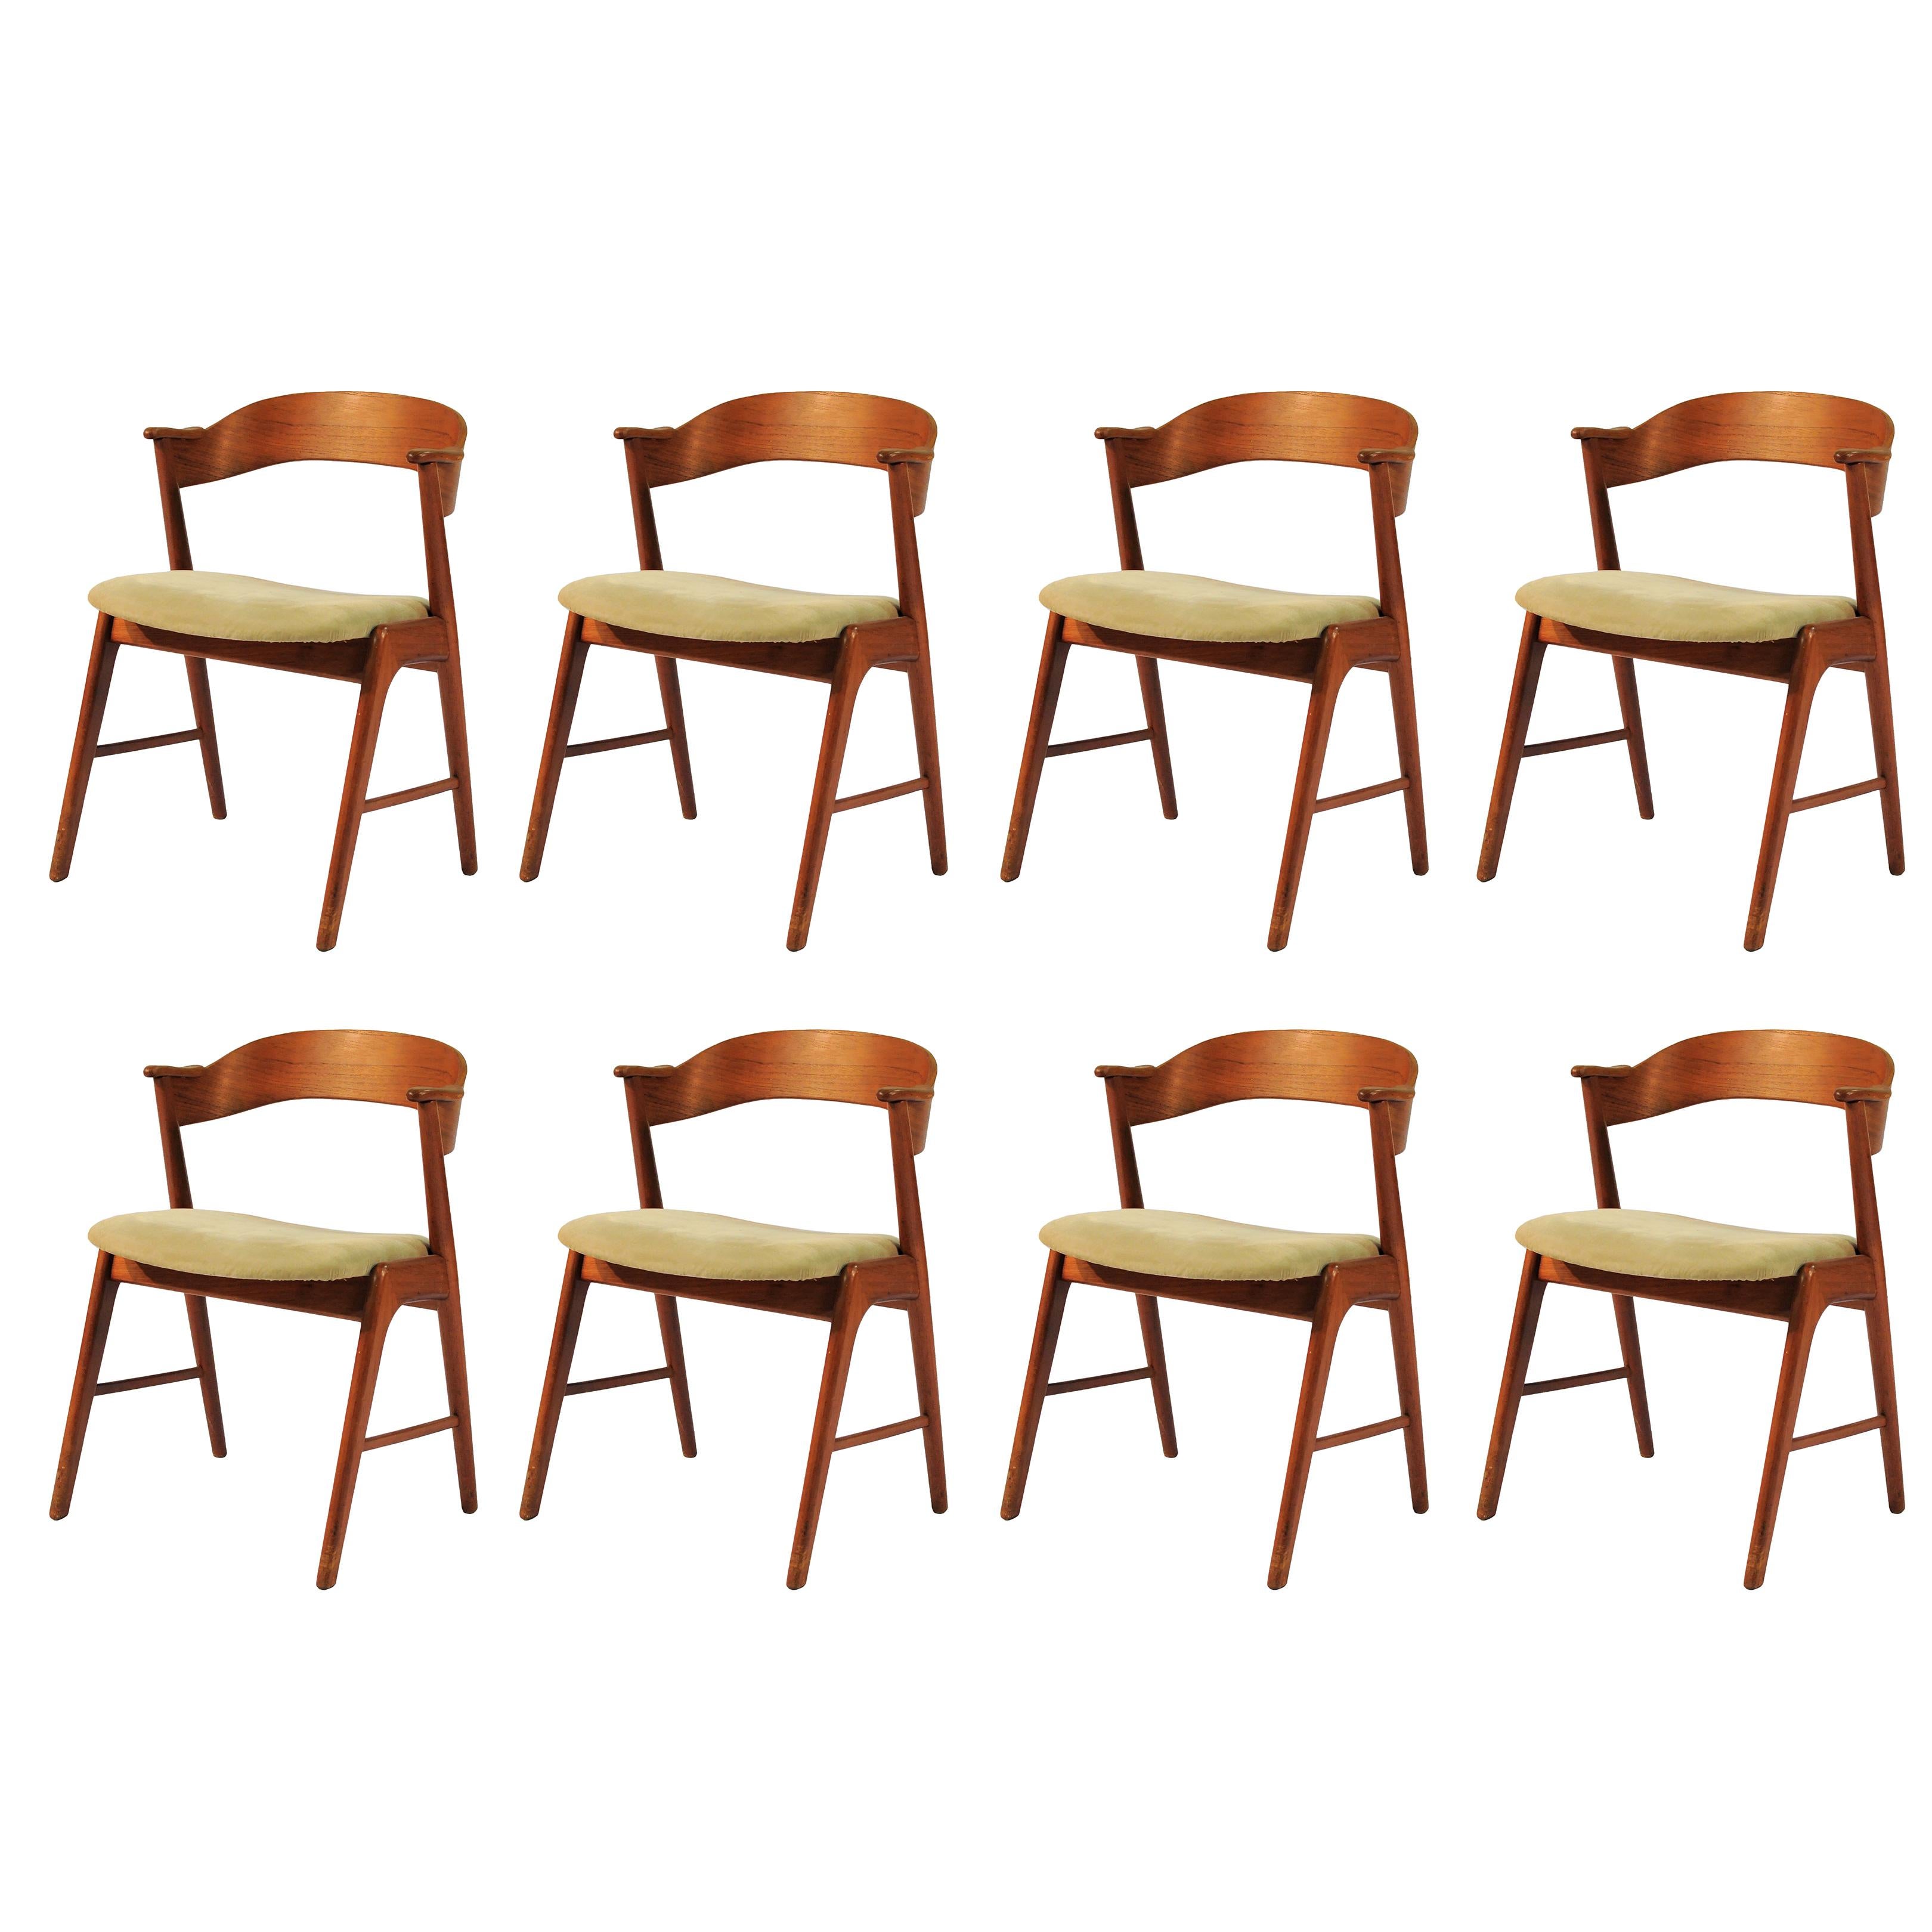 1960s Set of Eight Teak Dining Chairs Known as Model 32 - Choice of Upholstery